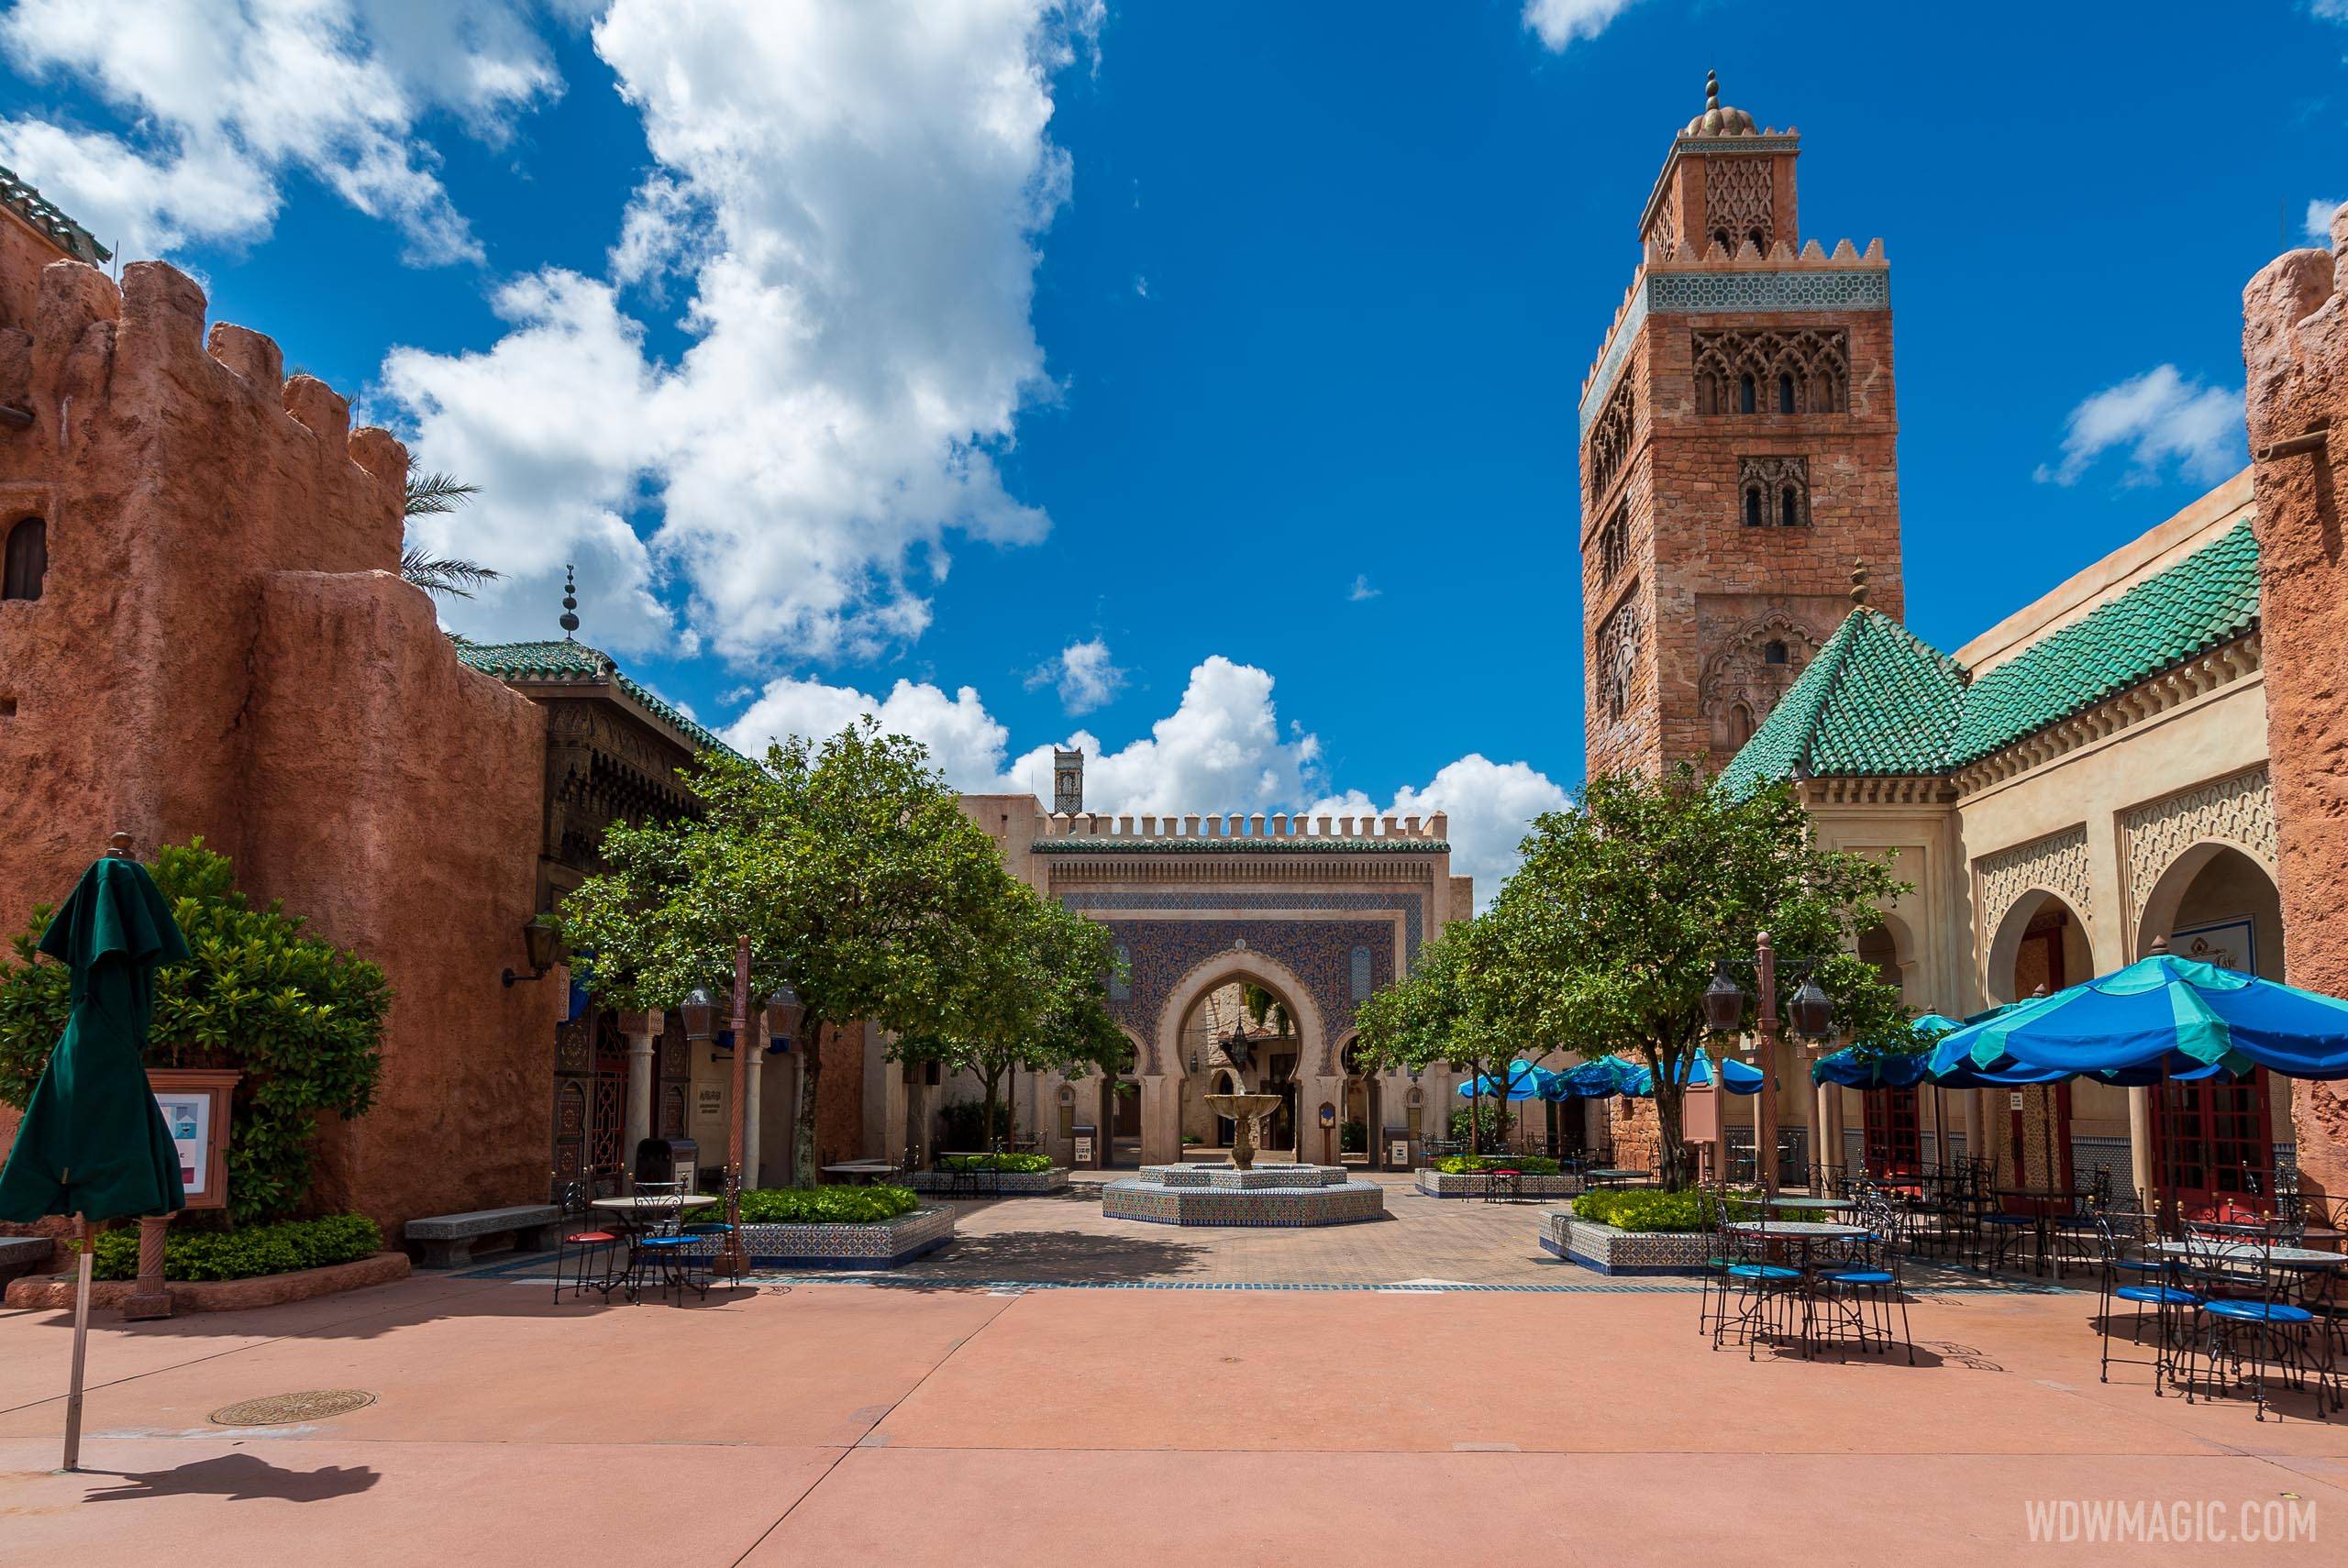 Disney to take over operations of the Morocco Pavilion at EPCOT